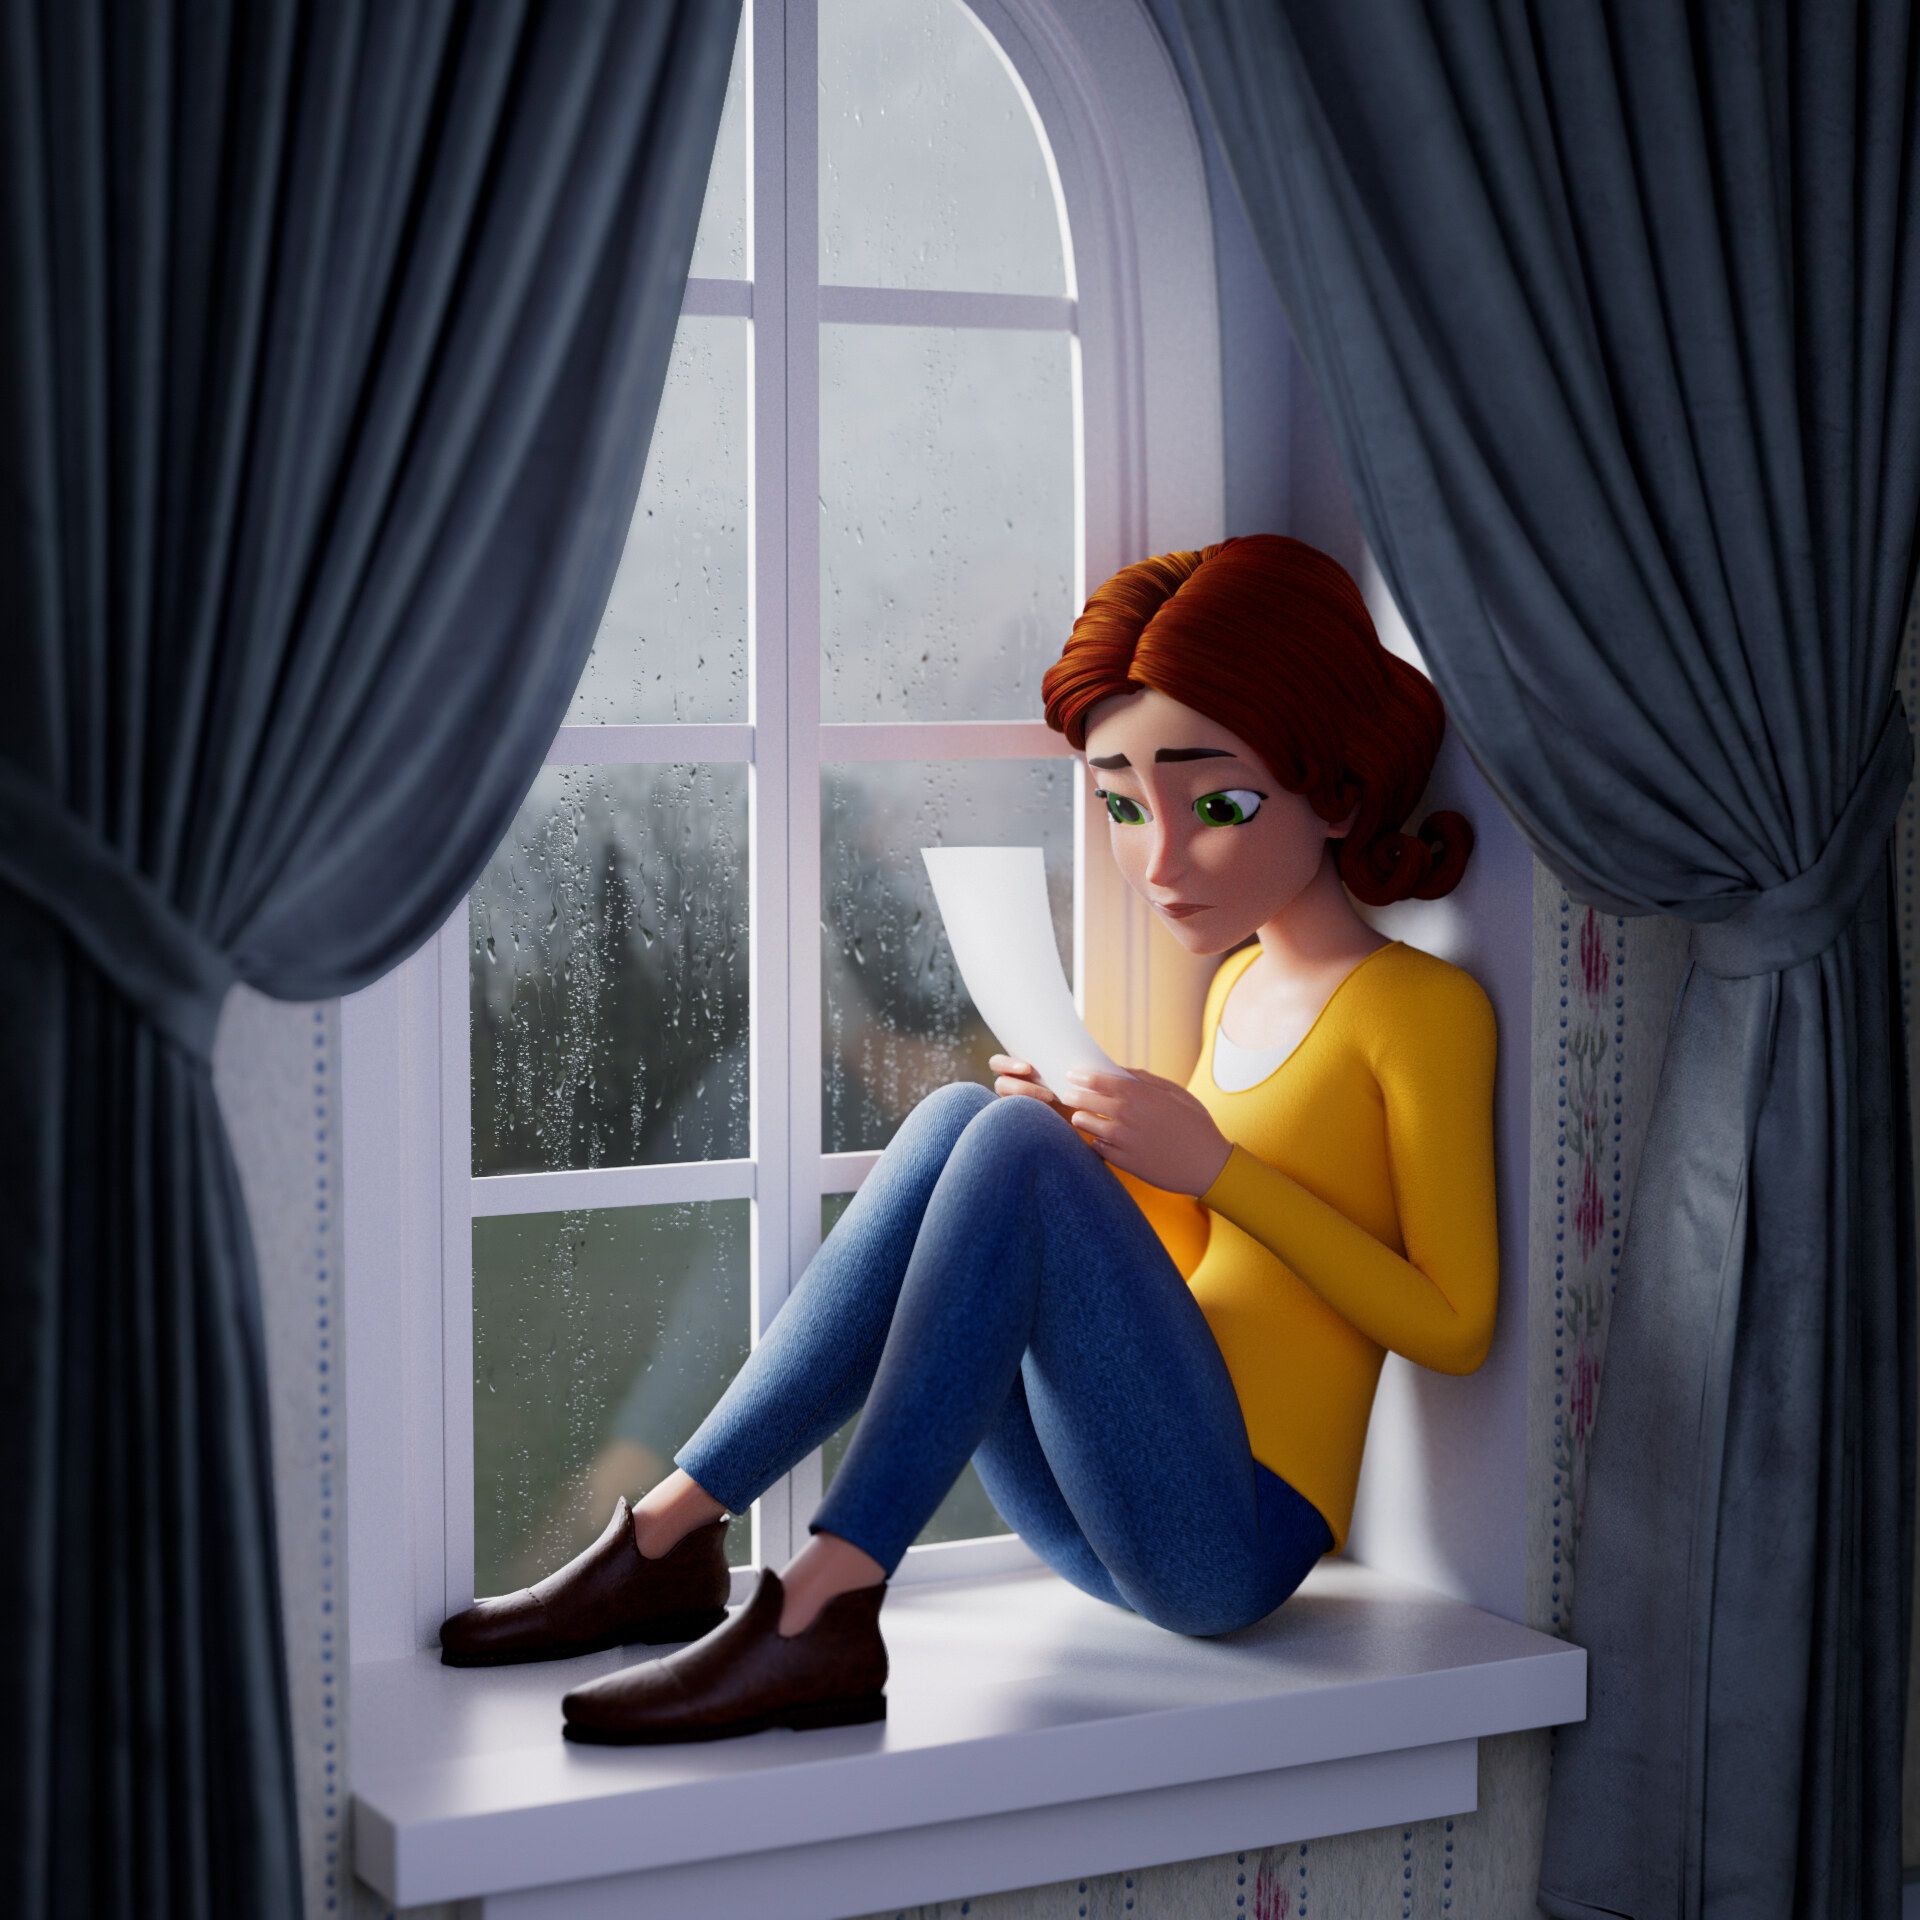 Maddie reading a note while sitting on a windowsill on a gloomy day